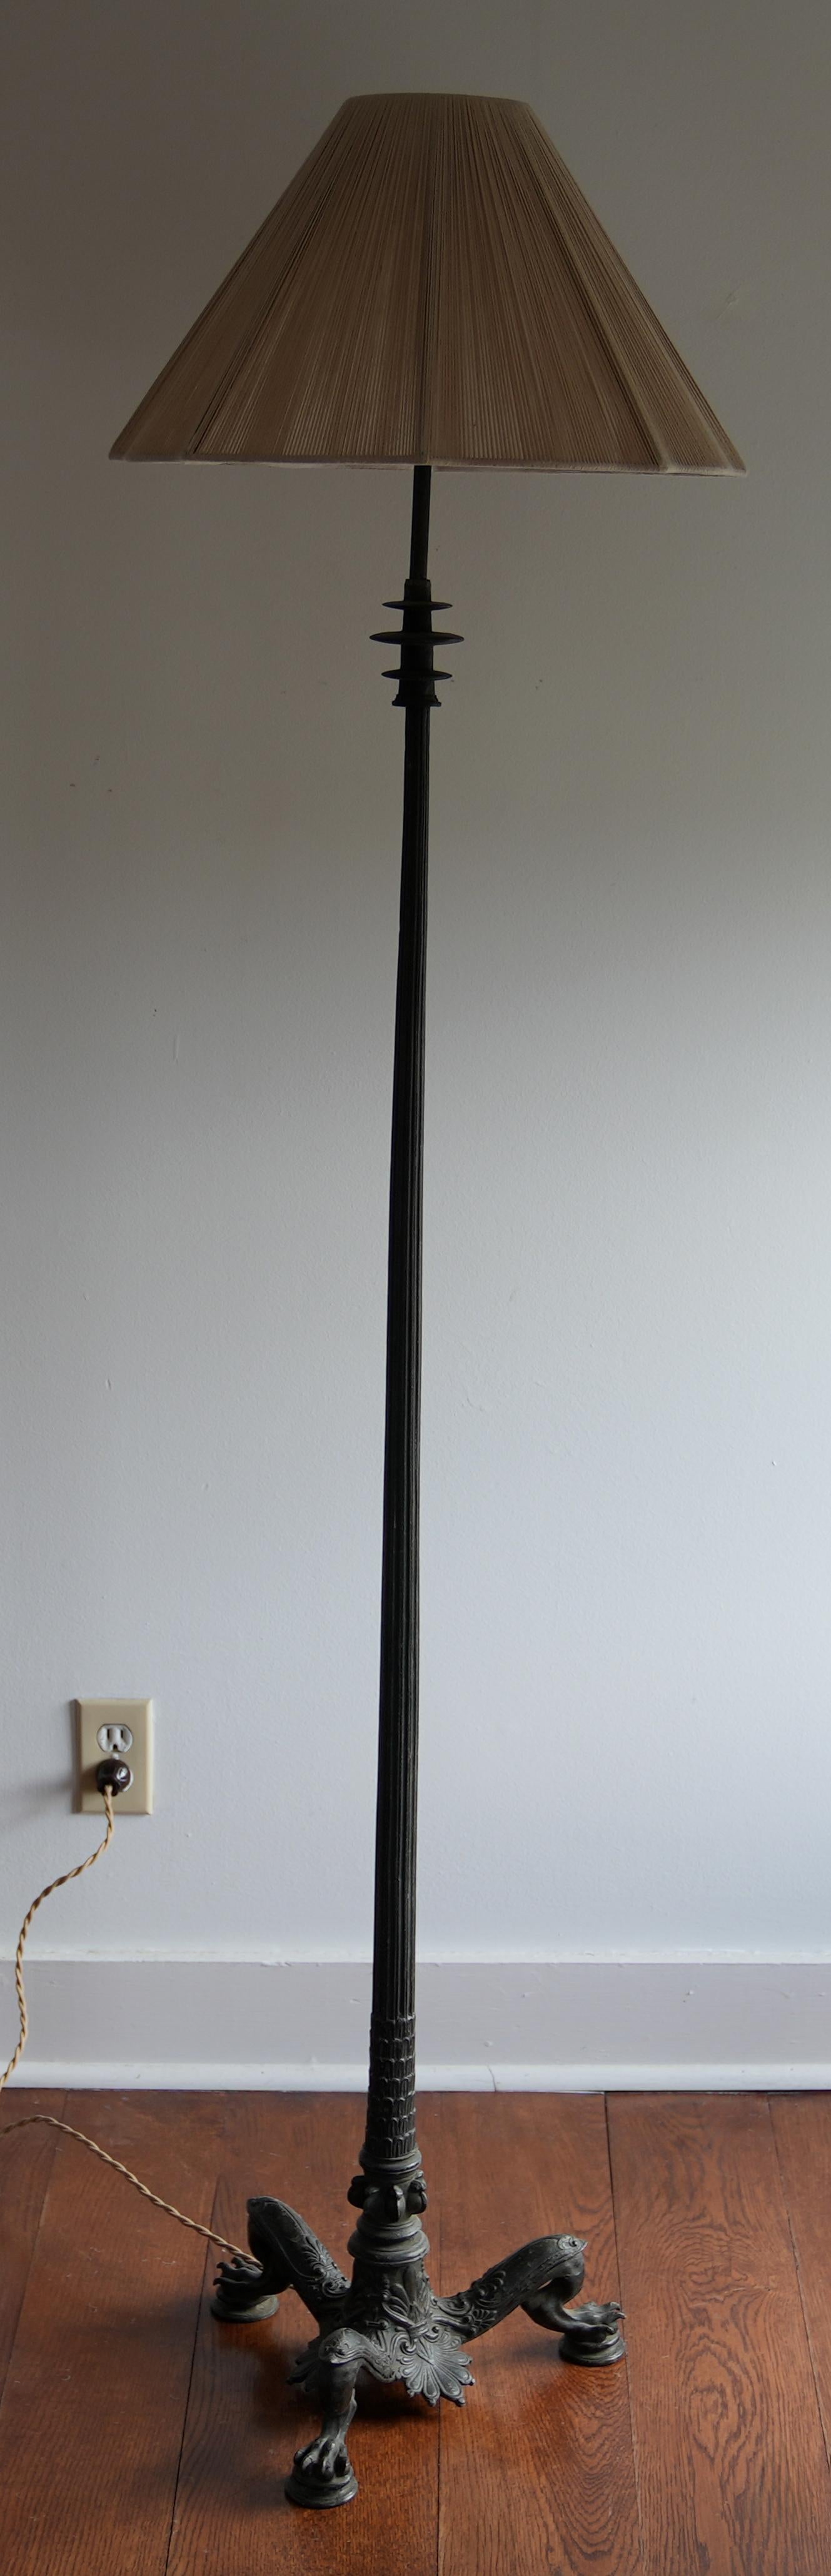 Bronze floor lamp Pompeii Grand Tour attributed to Caldwell
please contact me with any questions or for shipping quotes
